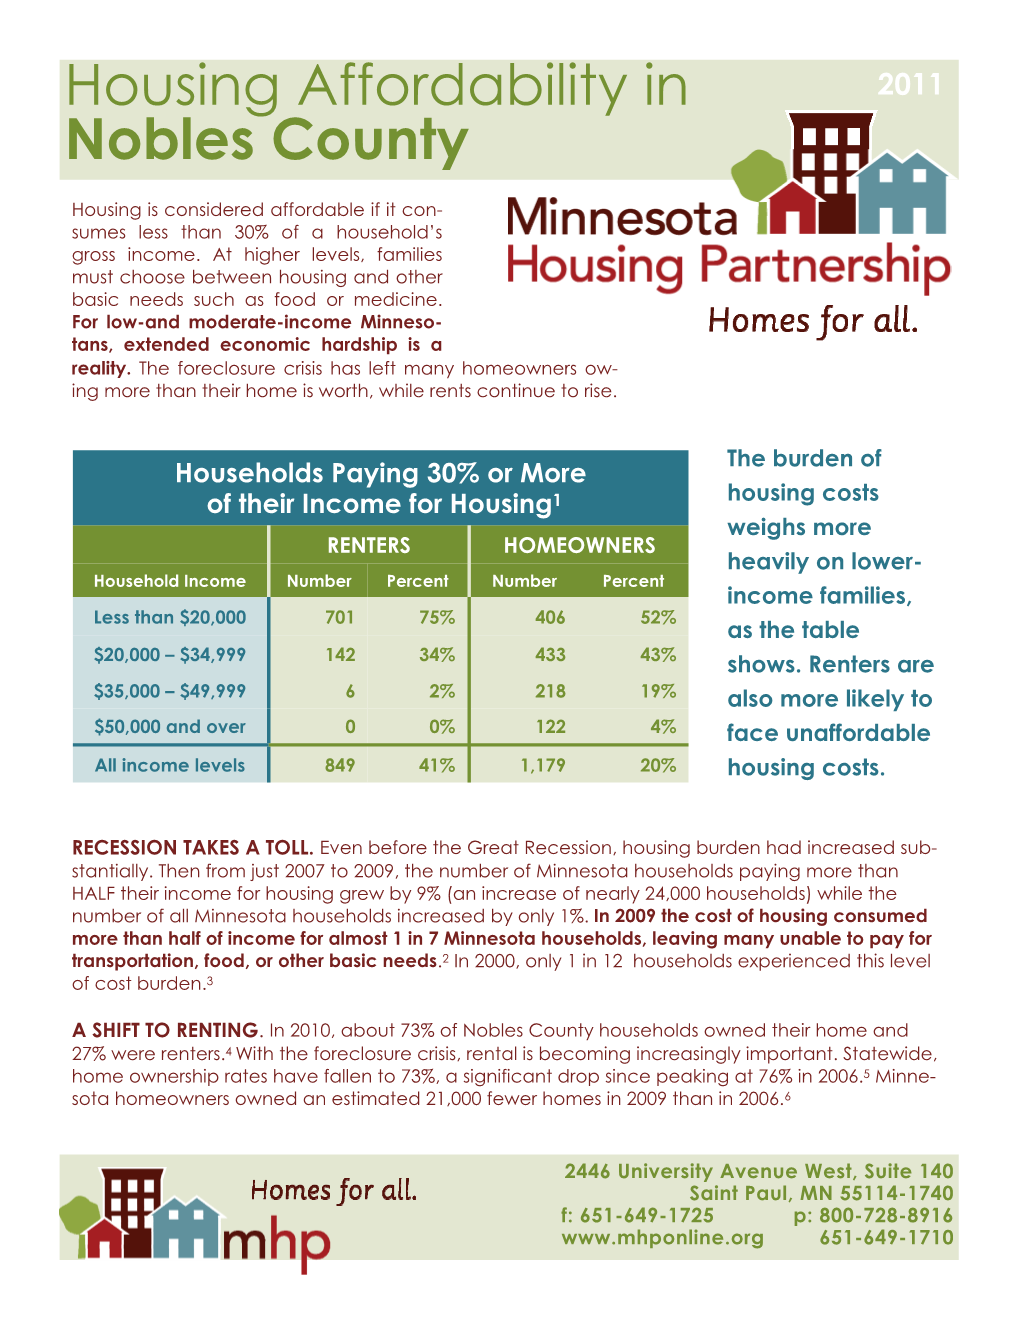 Housing Affordability in Nobles County